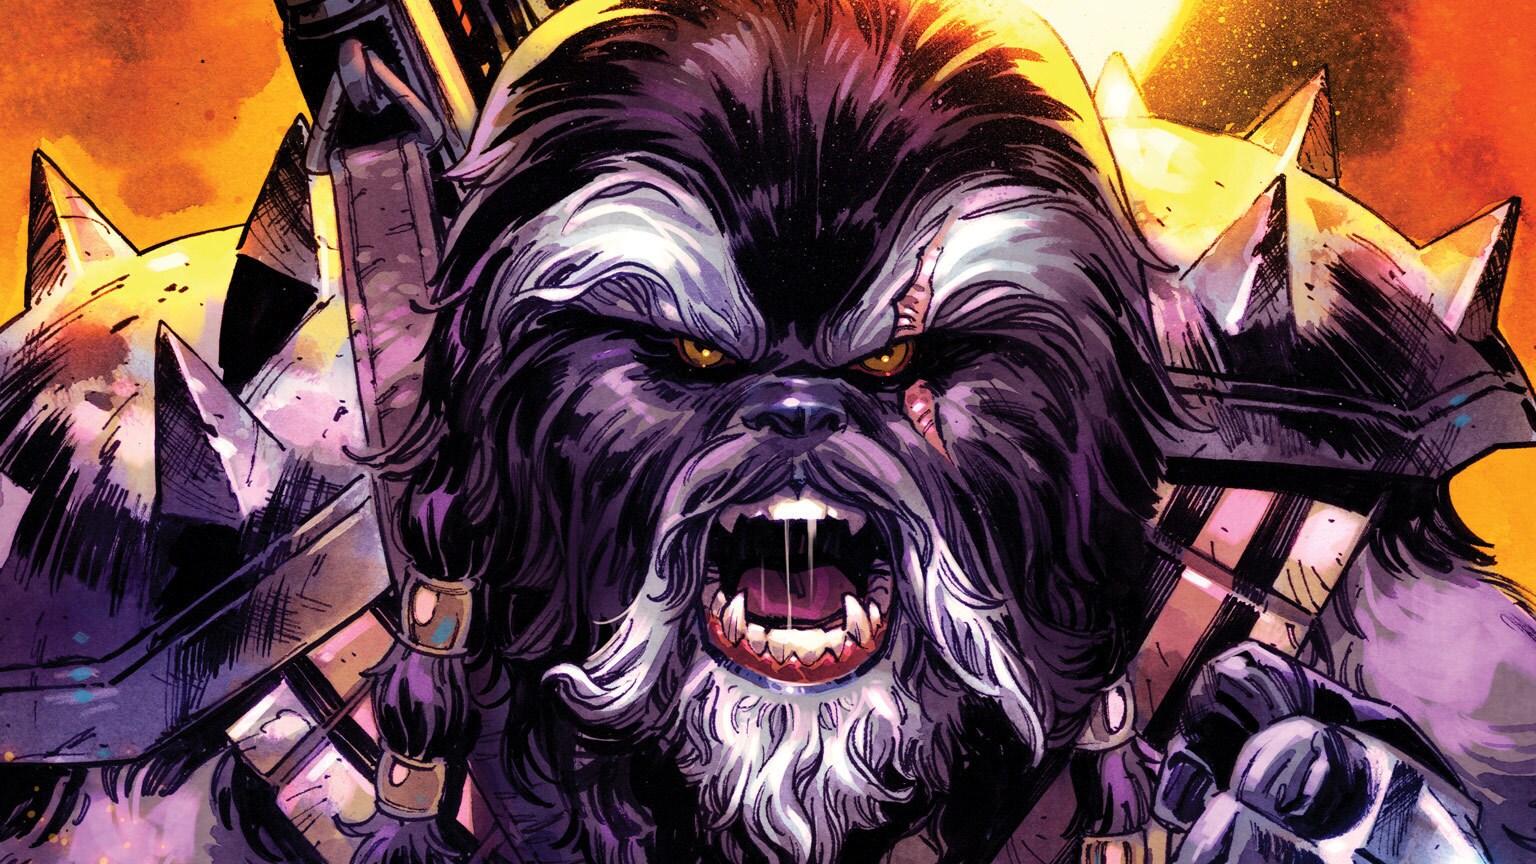 Krrsantan Attacks in Han Solo & Chewbacca and More from Marvel’s June 2022 Star Wars Comics - Exclusive